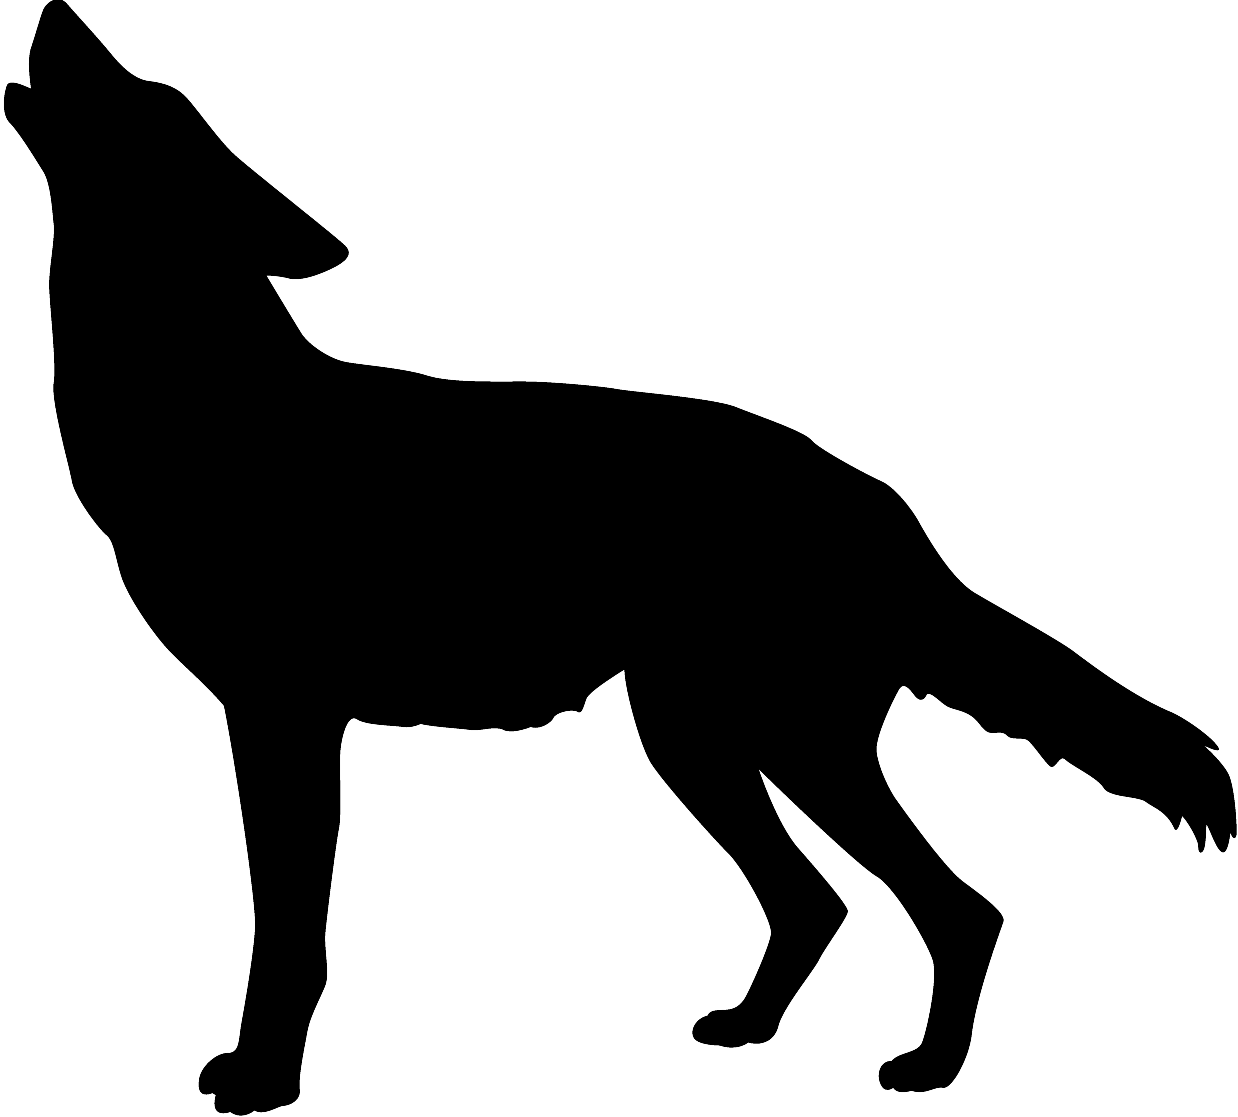 Coyote Baying At The Moon Silhouette Image